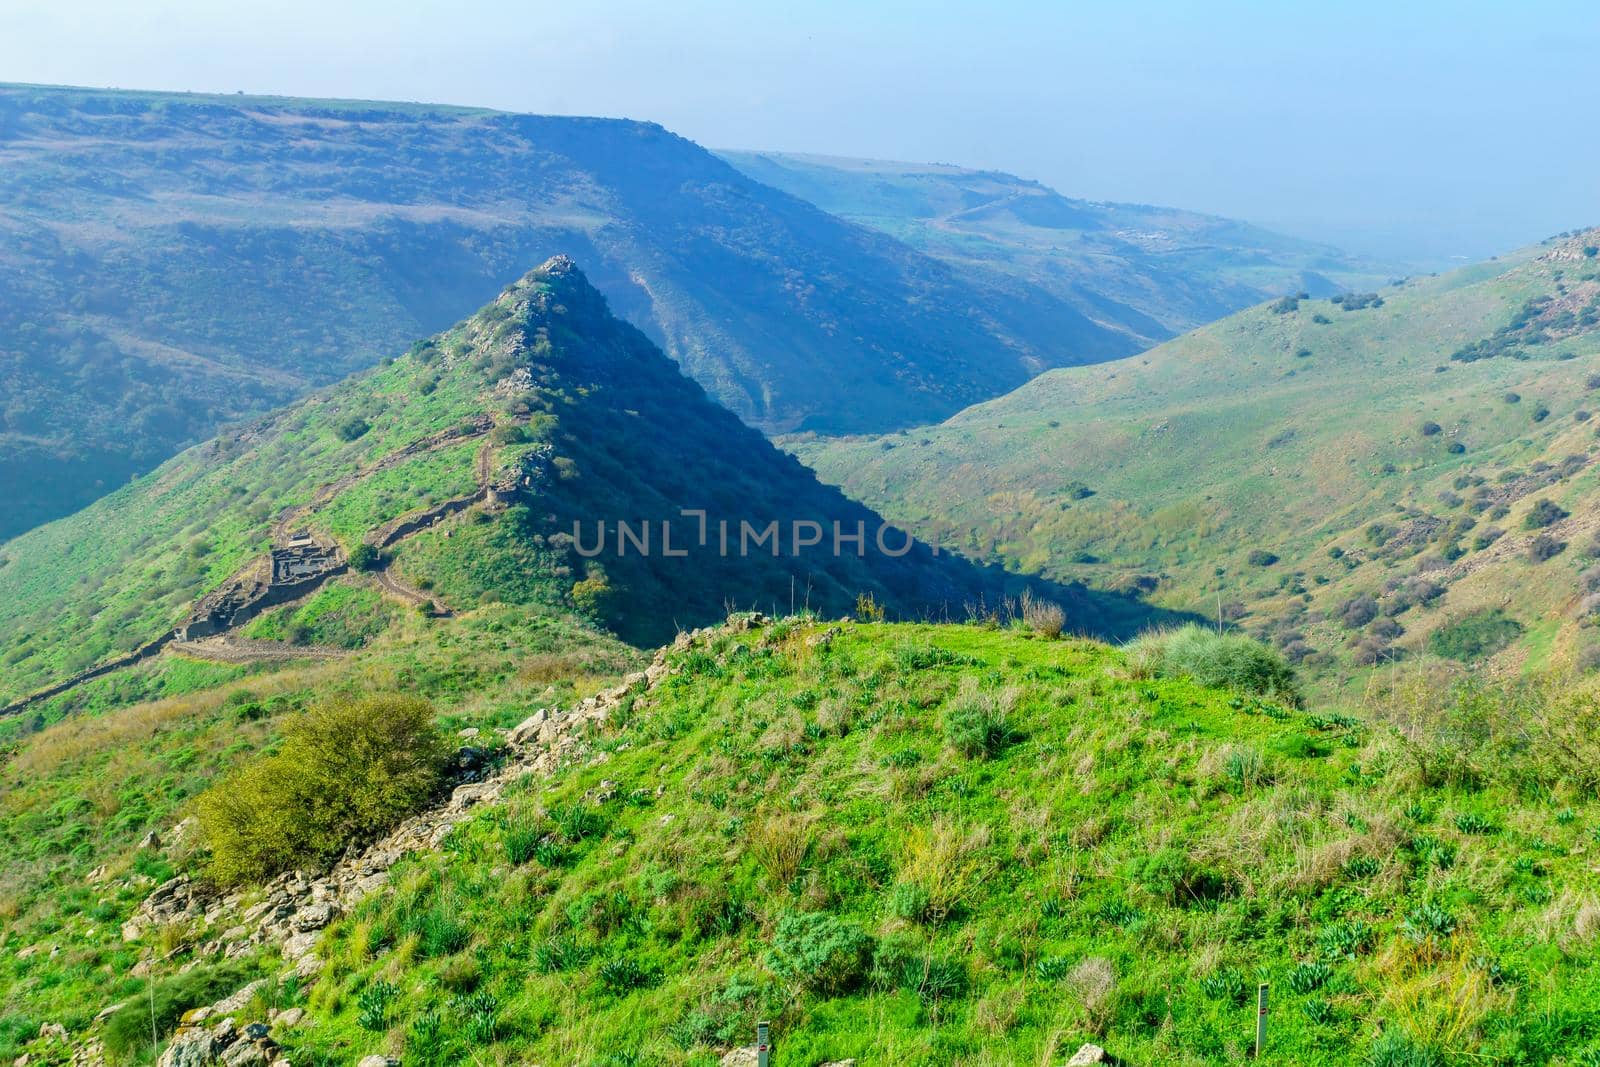 Gamla fortress and nearby landscape. The Golan Heights by RnDmS